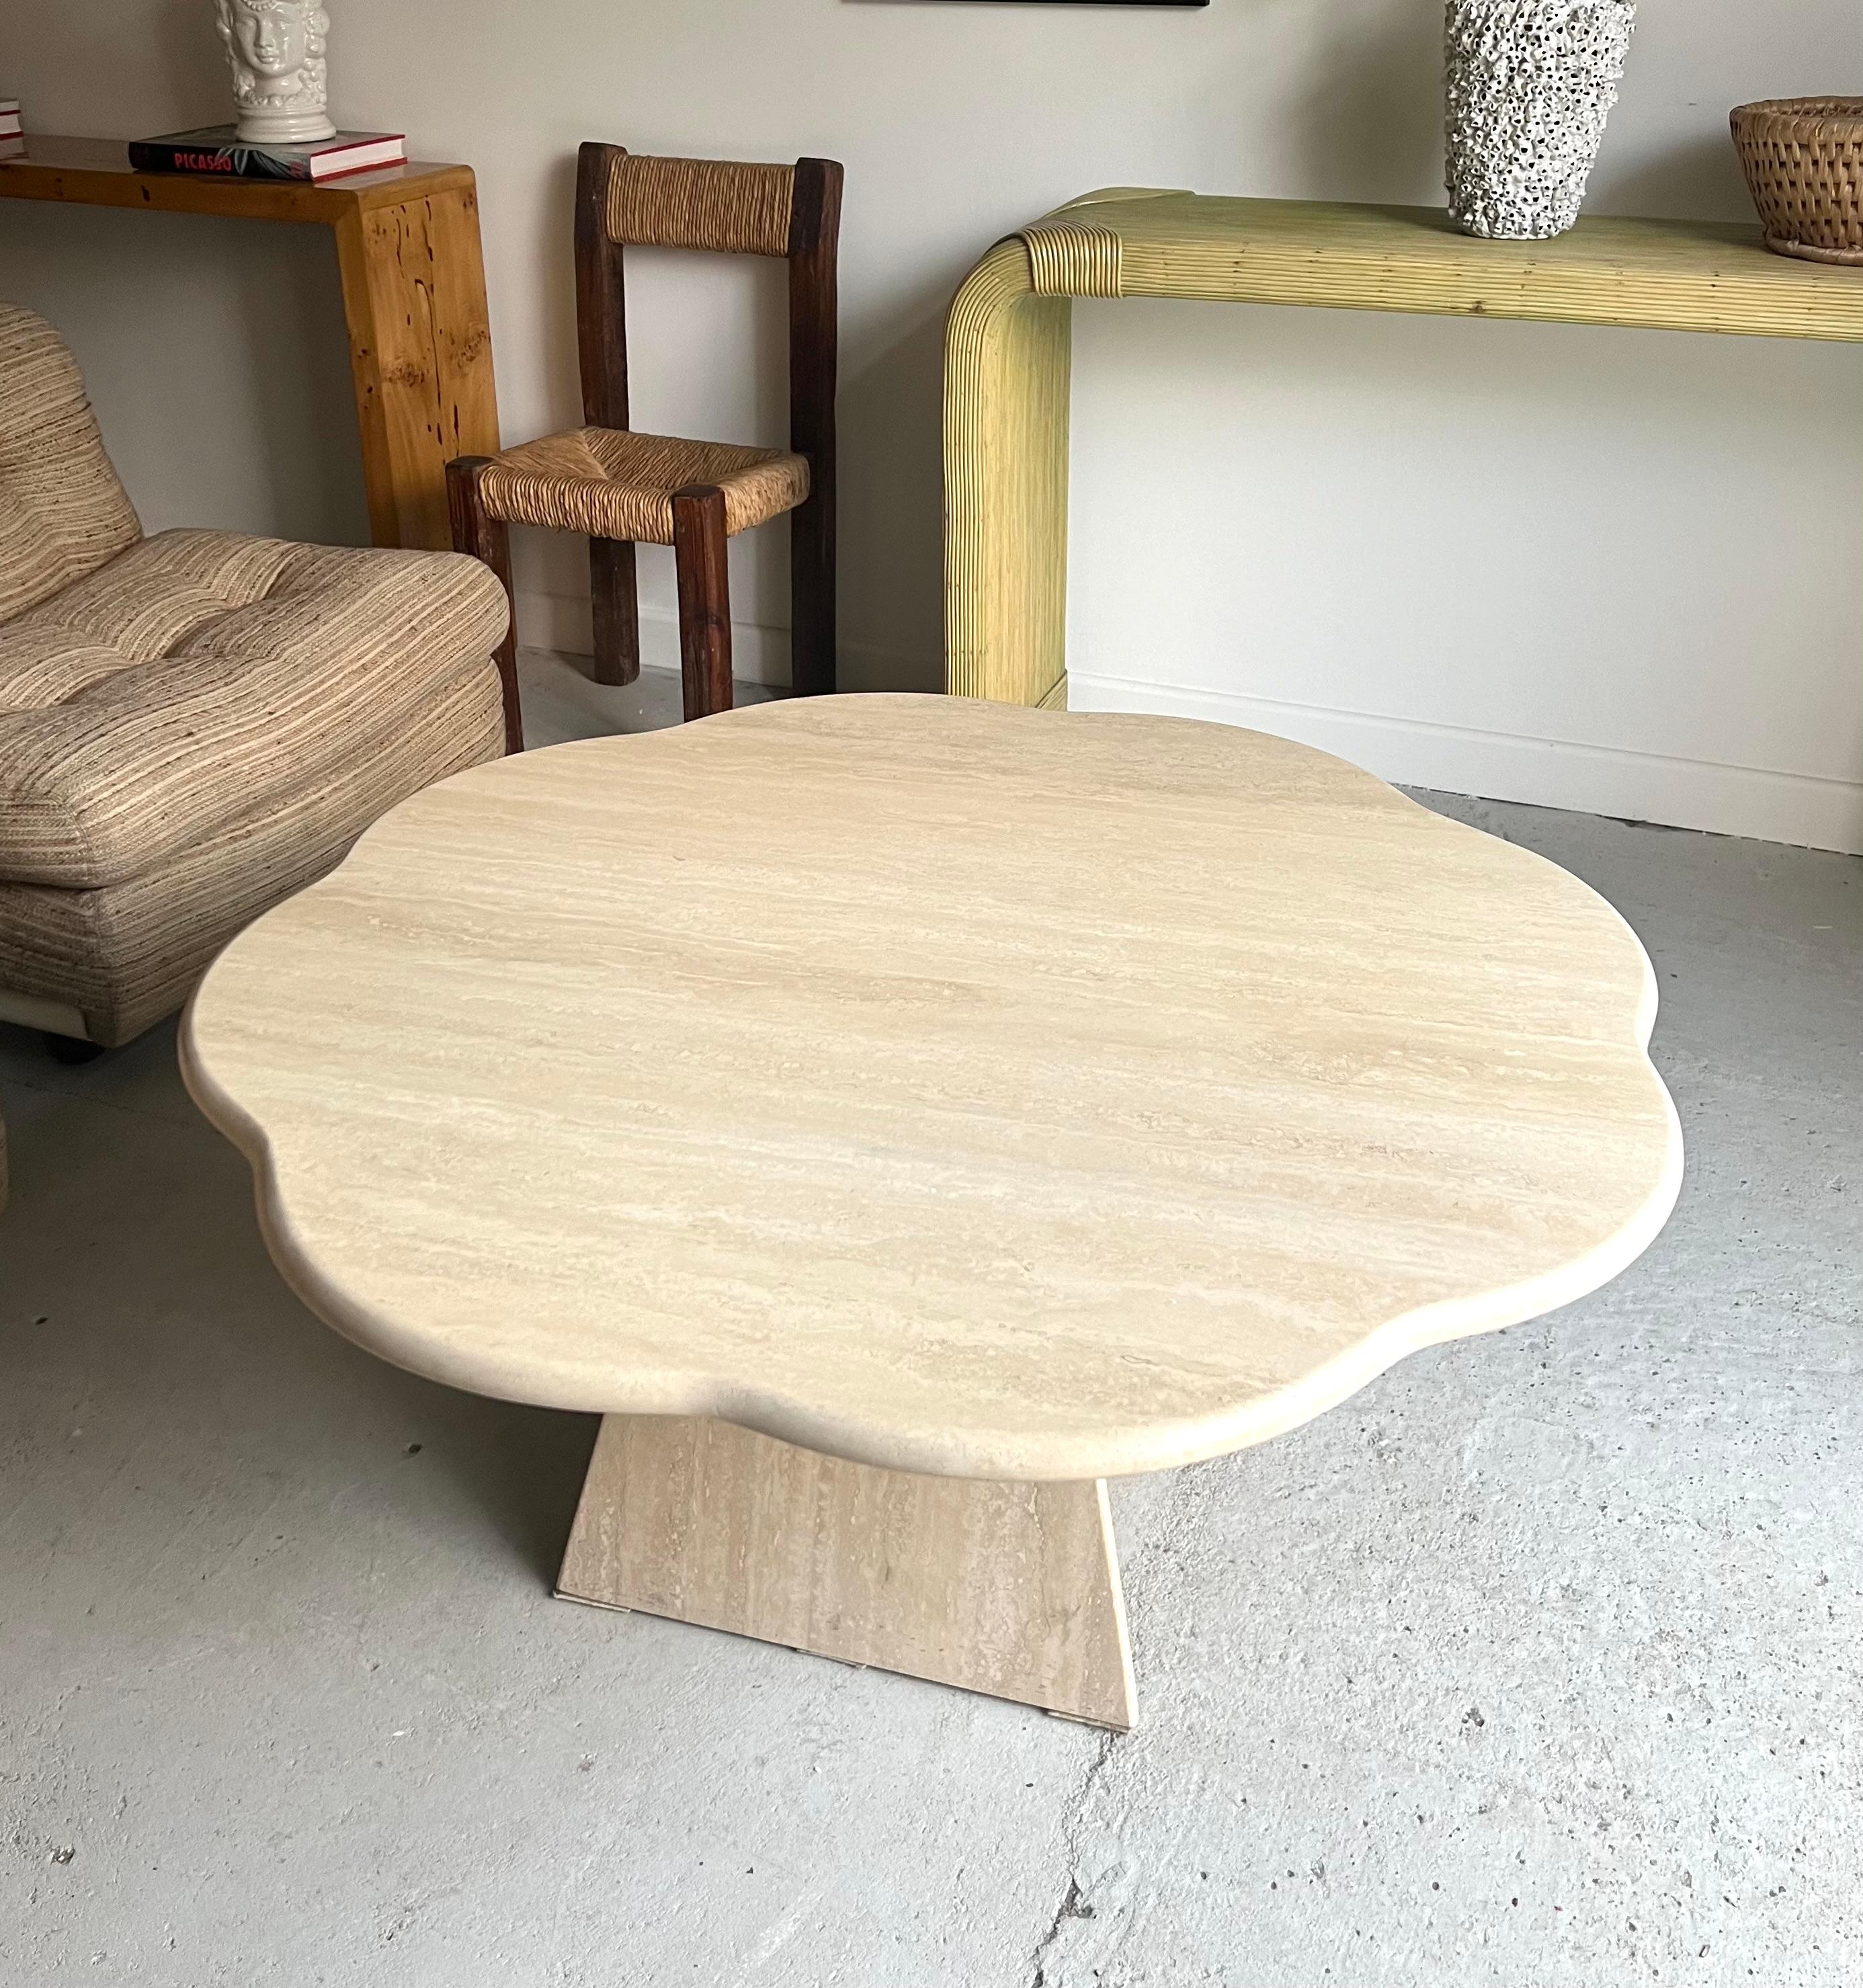 This exquisite Italian travertine coffee table from the 1980s boasts a unique and rare cut flower design, making it a standout piece.

It is in very good condition for its age, without any imperfections.